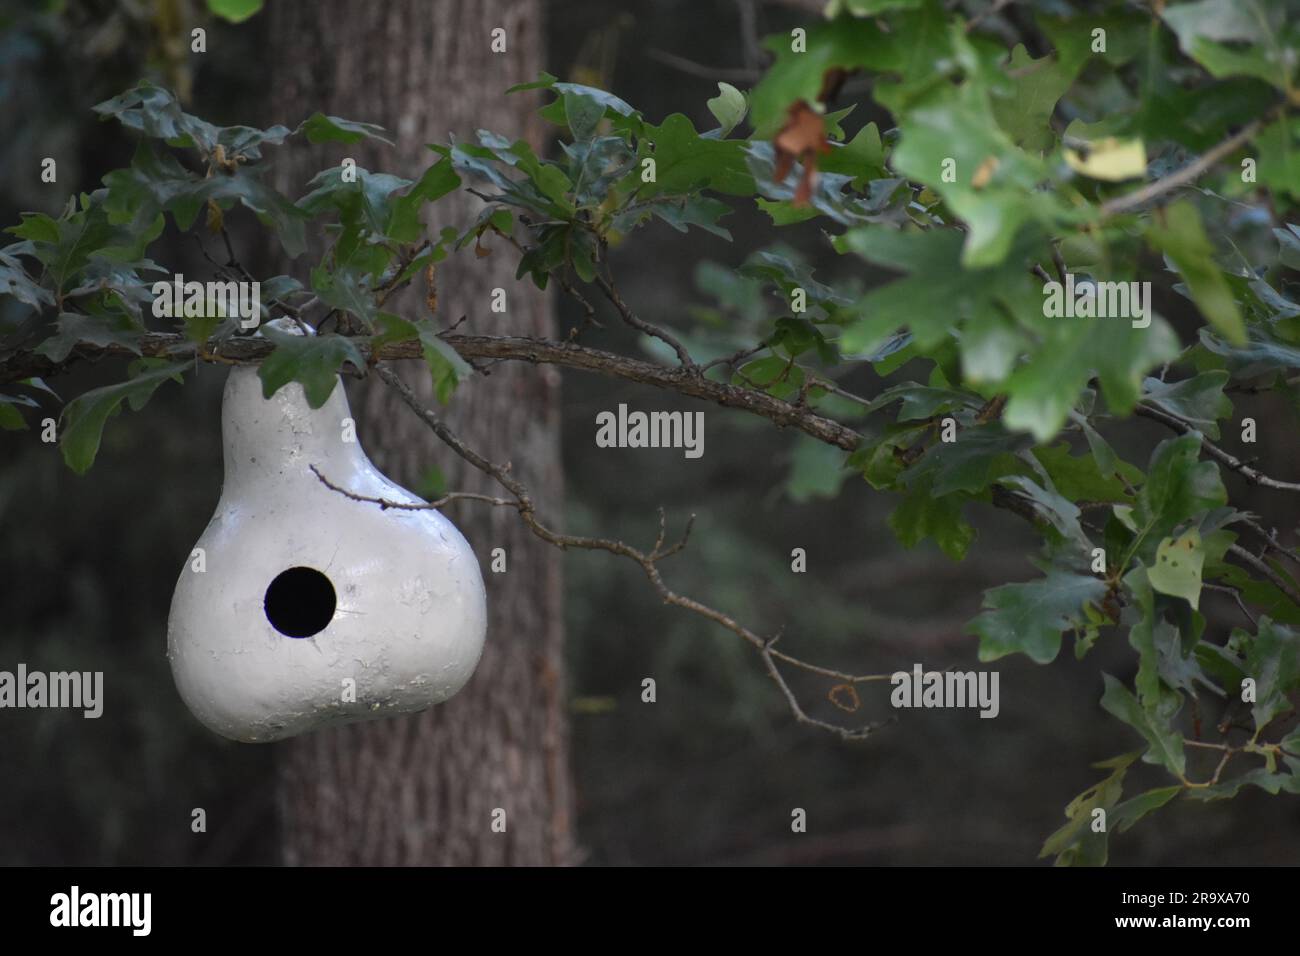 A gourd that has been hollowed out, painted, and hung up in an oak tree for use as a bird house.  Bright white against a dark background. Stock Photo